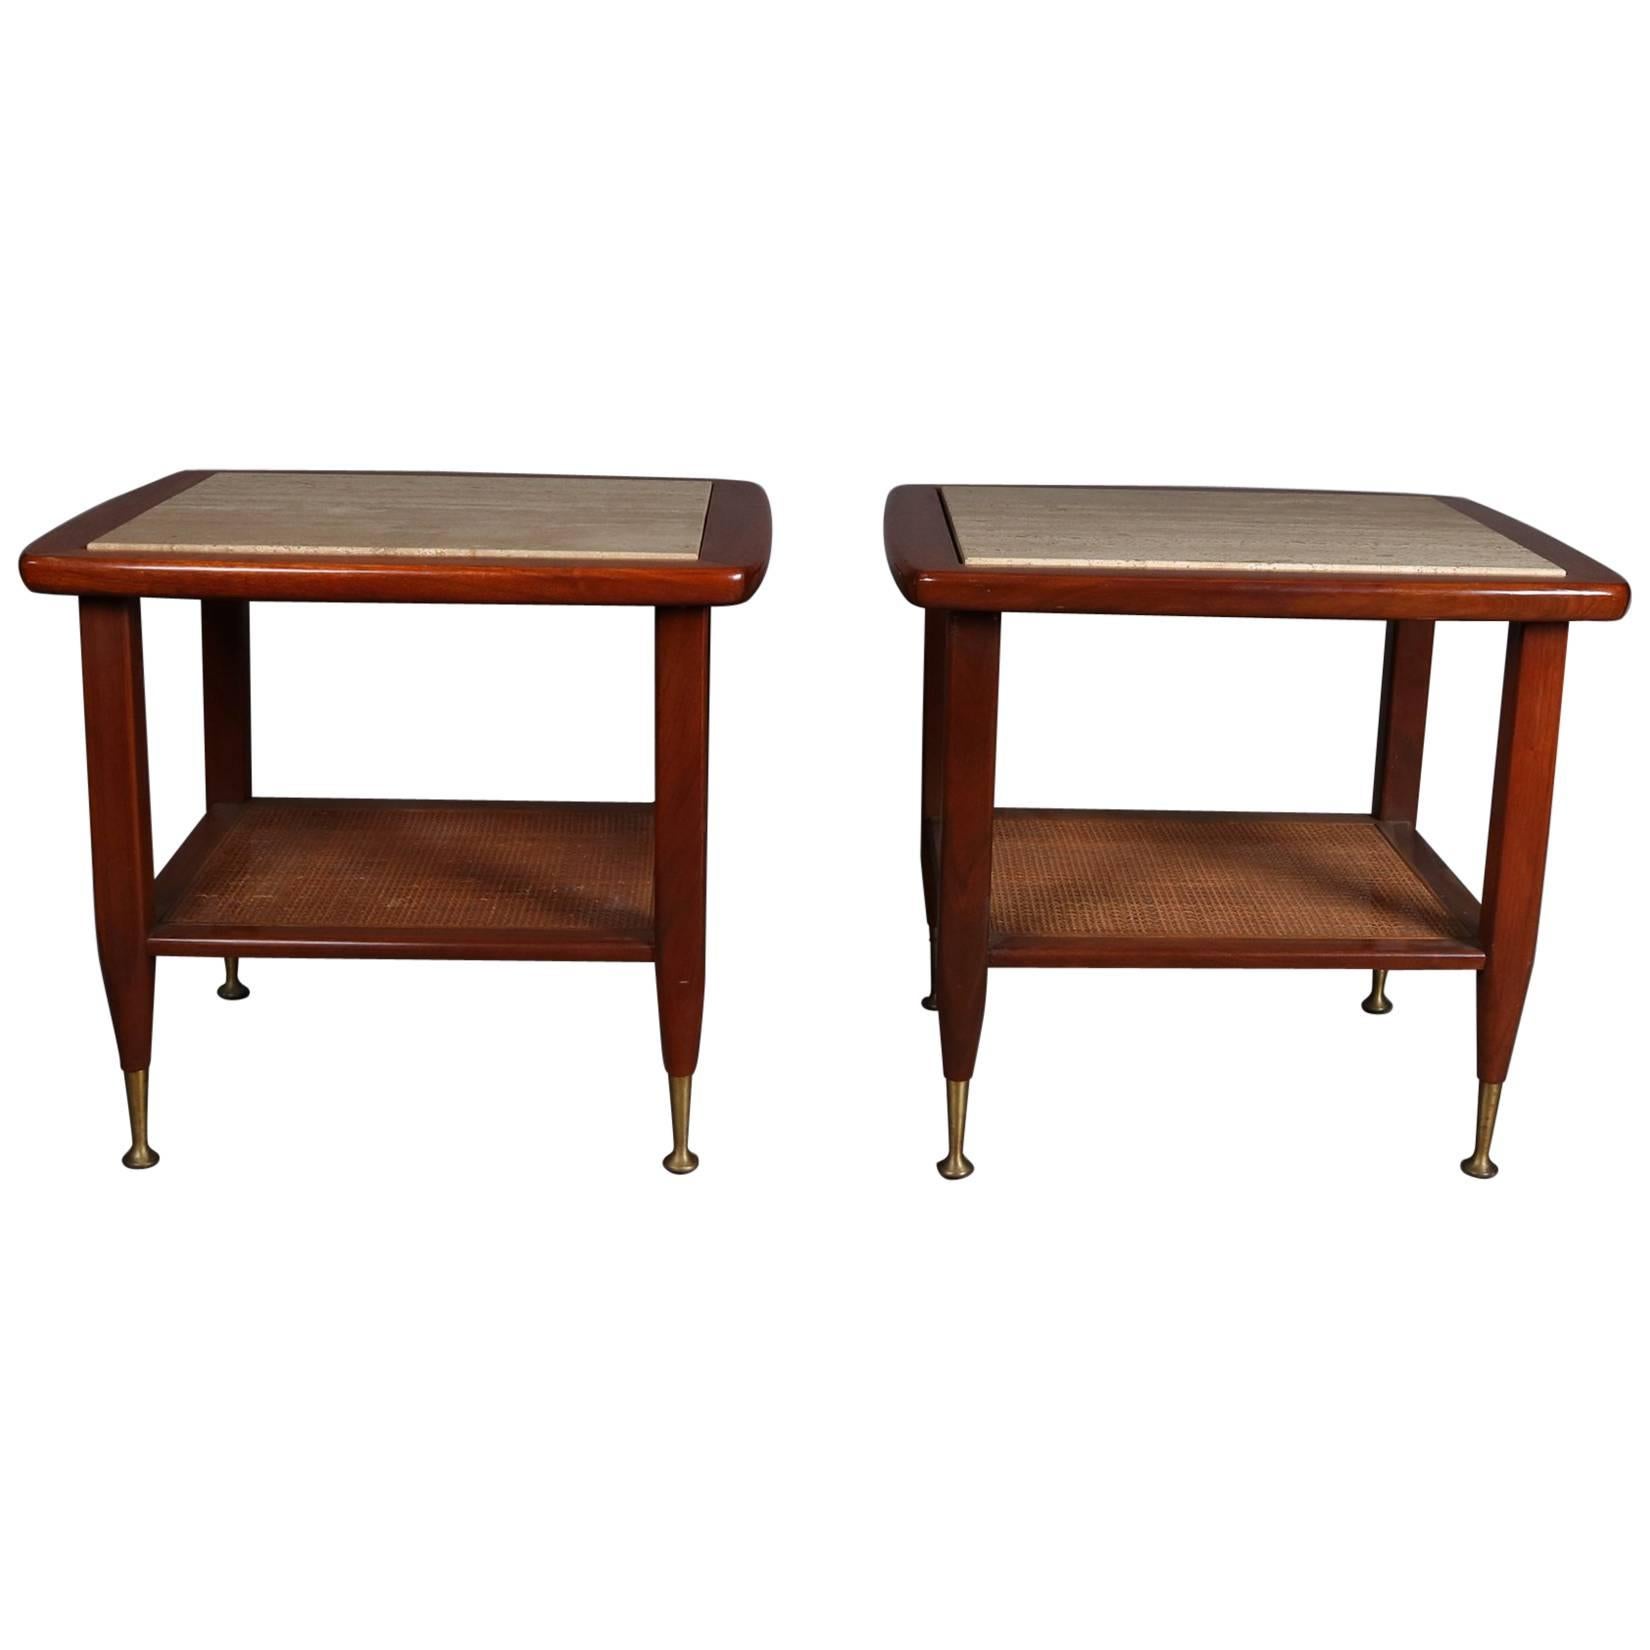 Pair of Italian Mid-Century Modern Teak, Marble & Caned End Stands, 20th Century